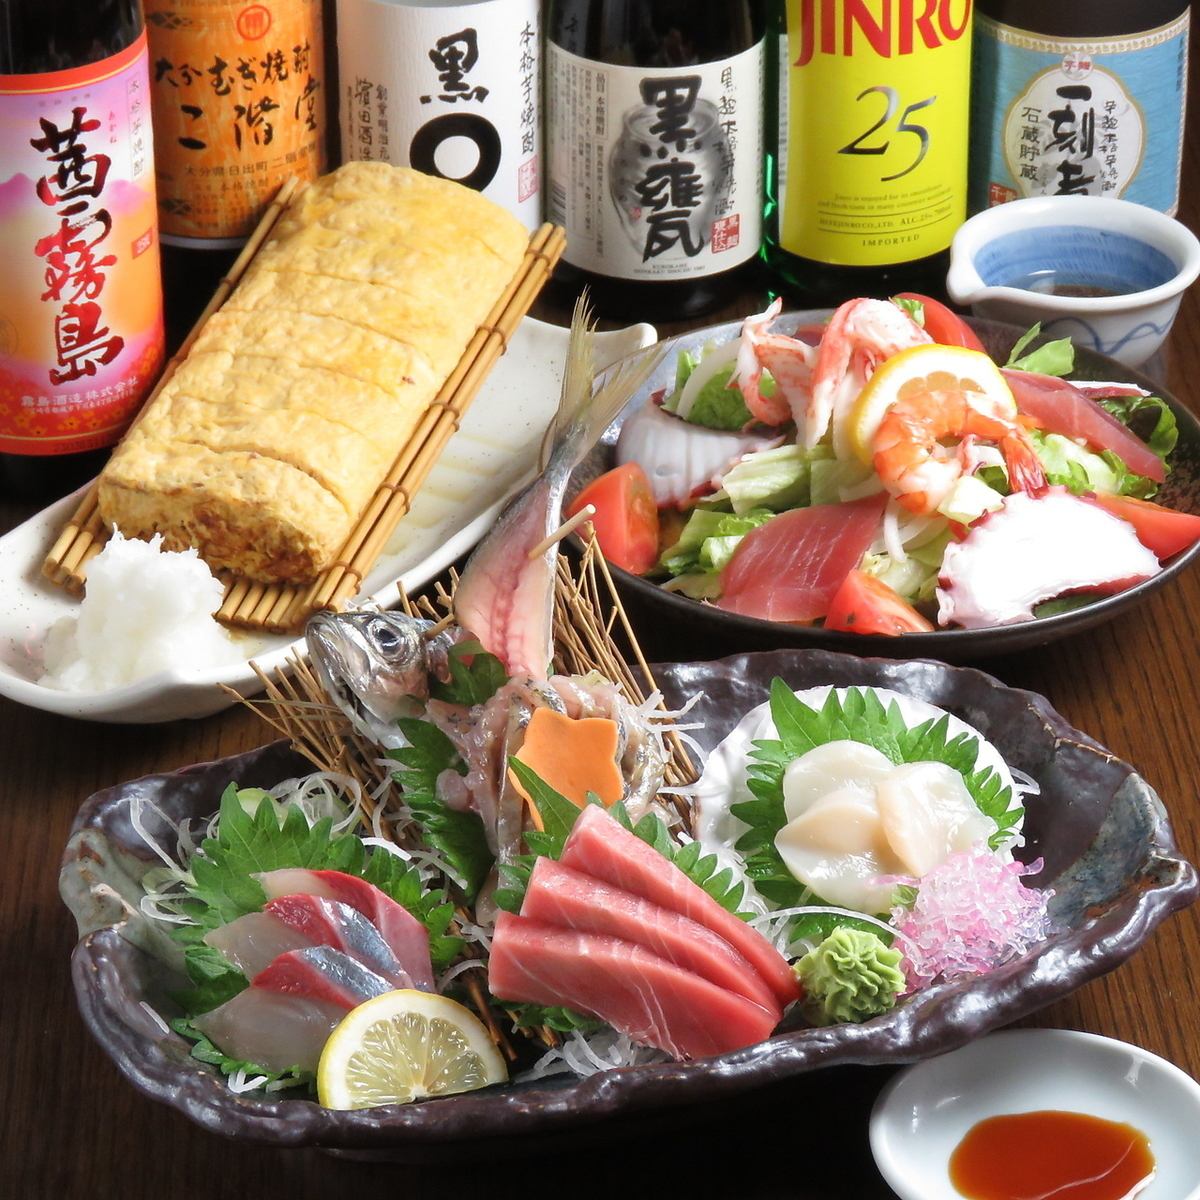 An izakaya full of seafood dishes using local fish and specialty menus! Lunches and large parties are also available.